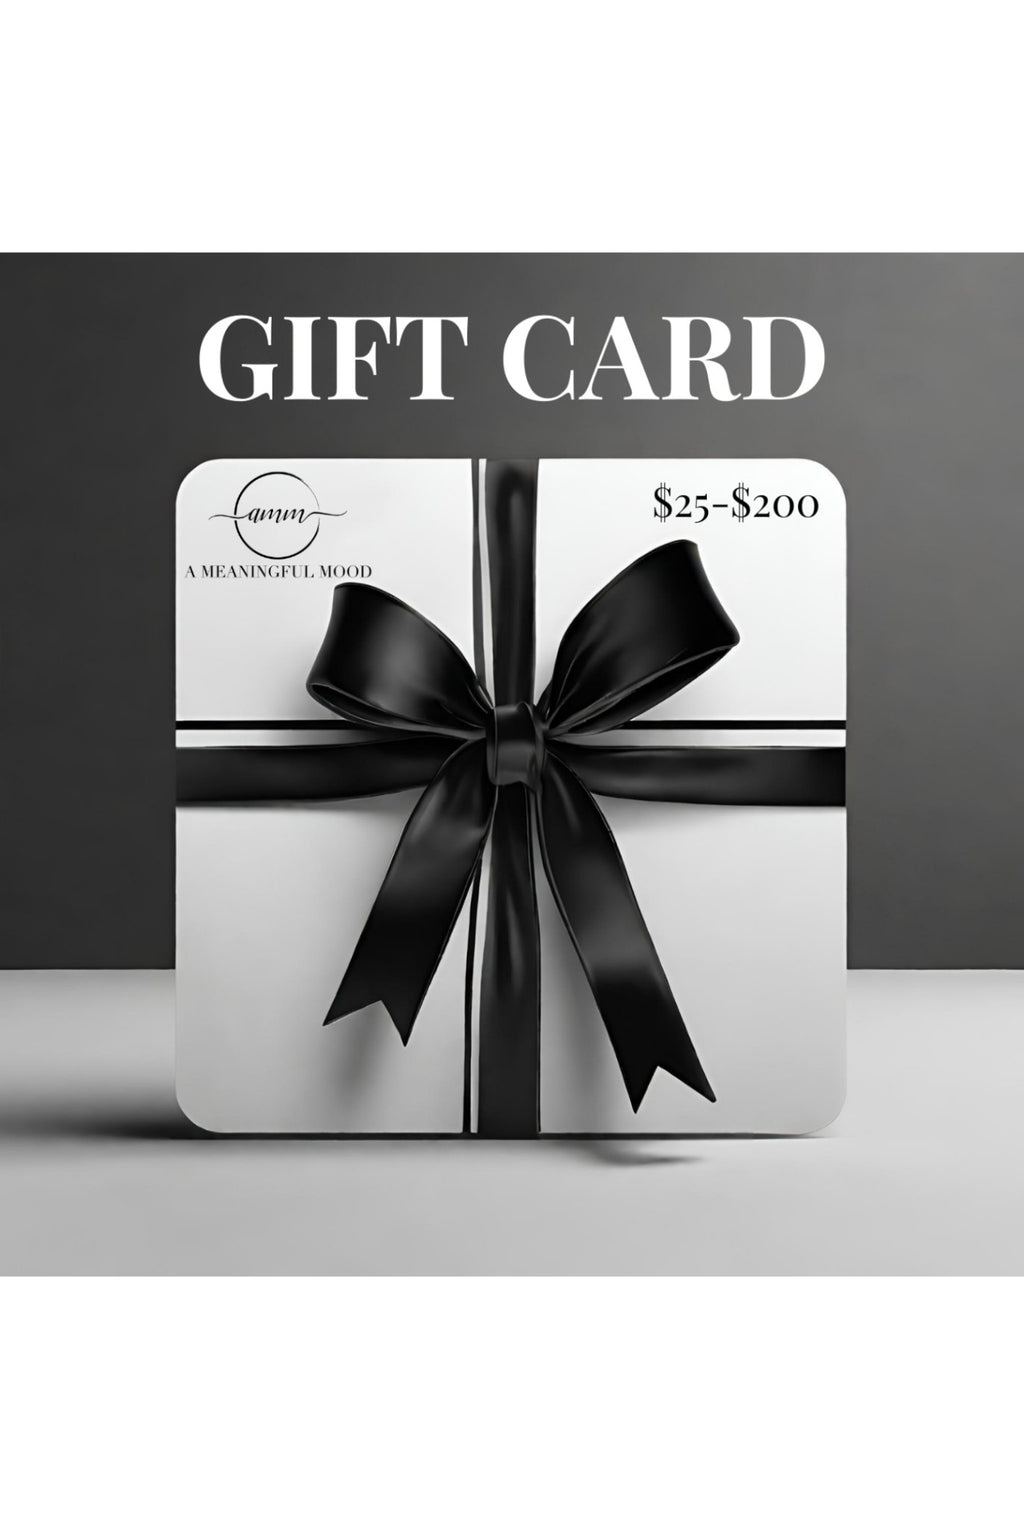 Gift Card - A Meaningful Mood